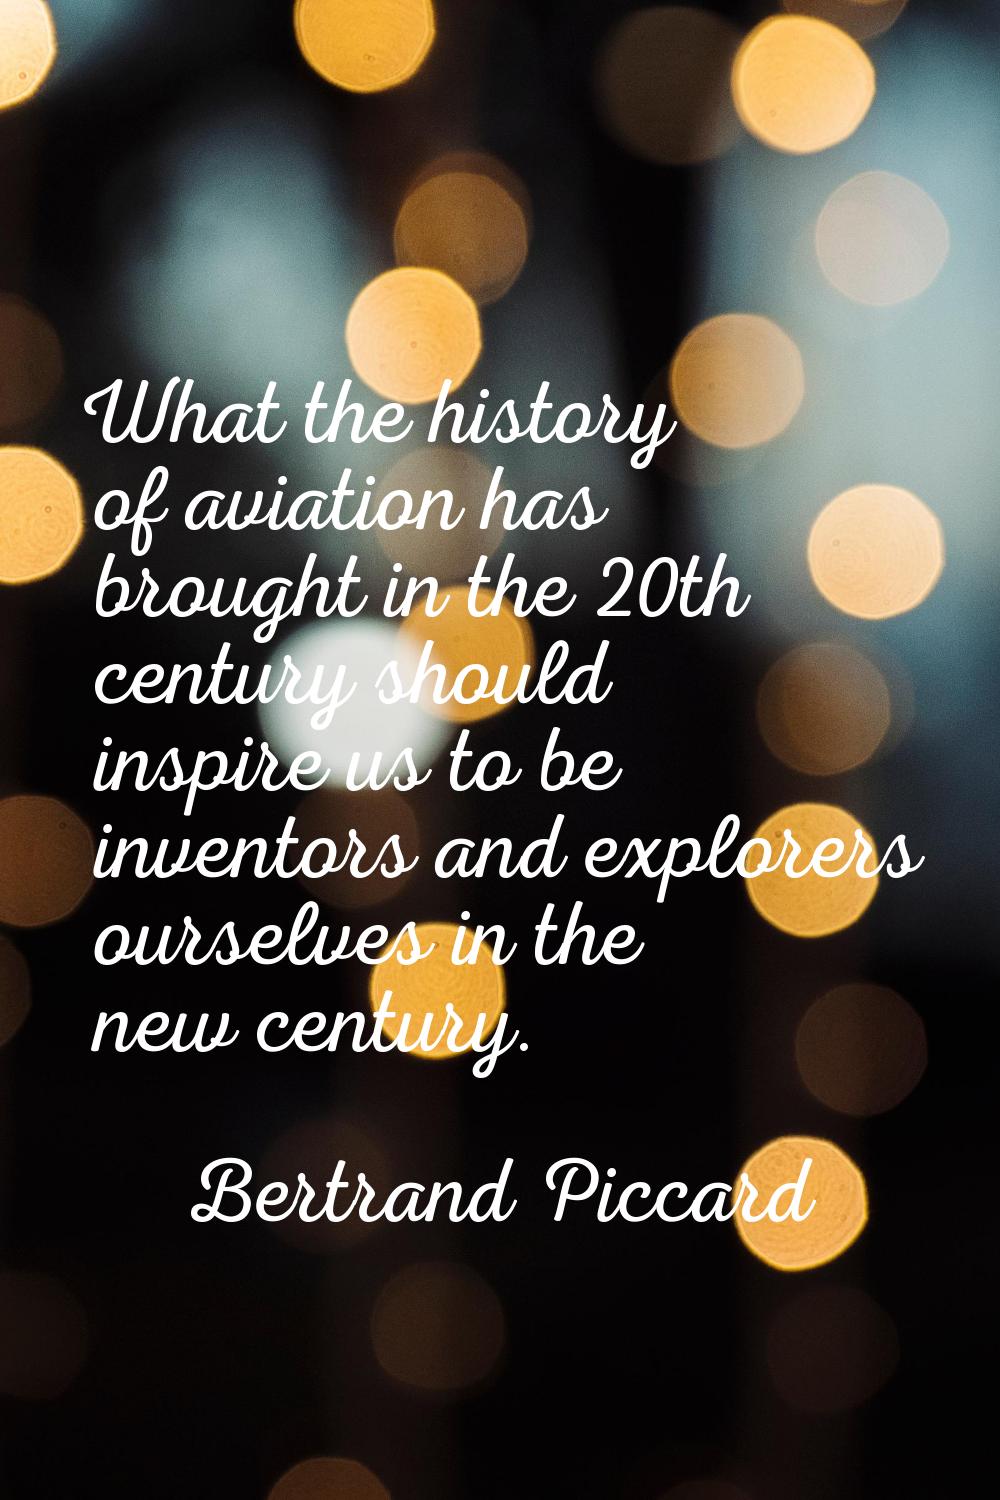 What the history of aviation has brought in the 20th century should inspire us to be inventors and 